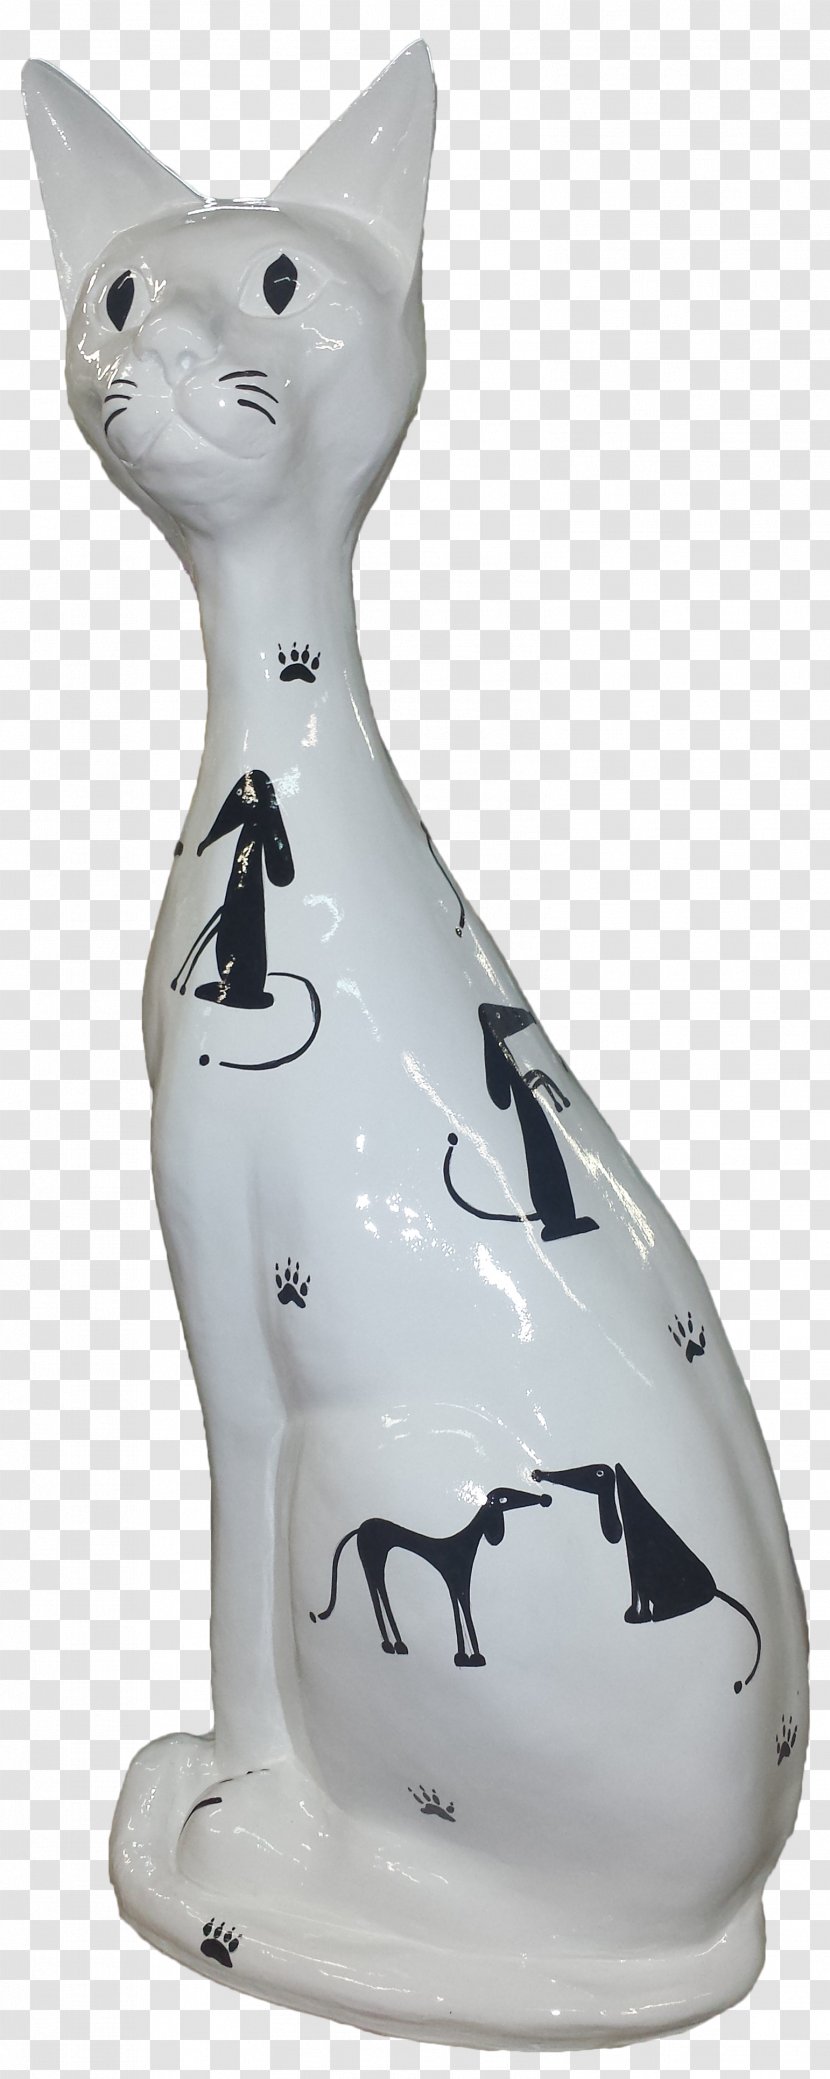 Whiskers Cat Figurine Transparent PNG